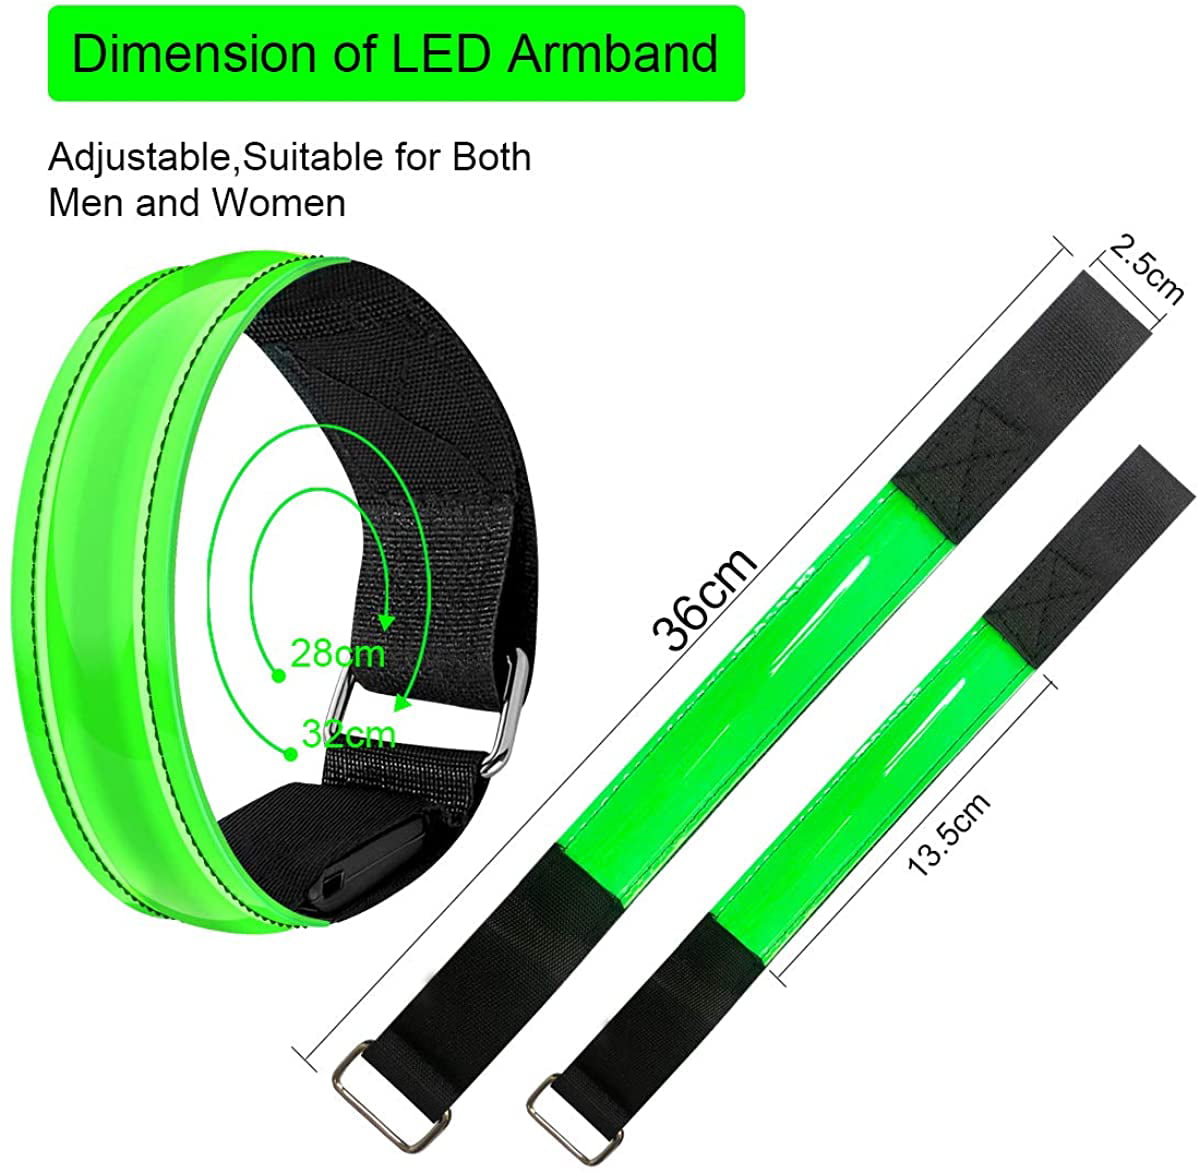 Running Lights for Runners 2 Pack High Visibility Rech... Alintor LED Armband 